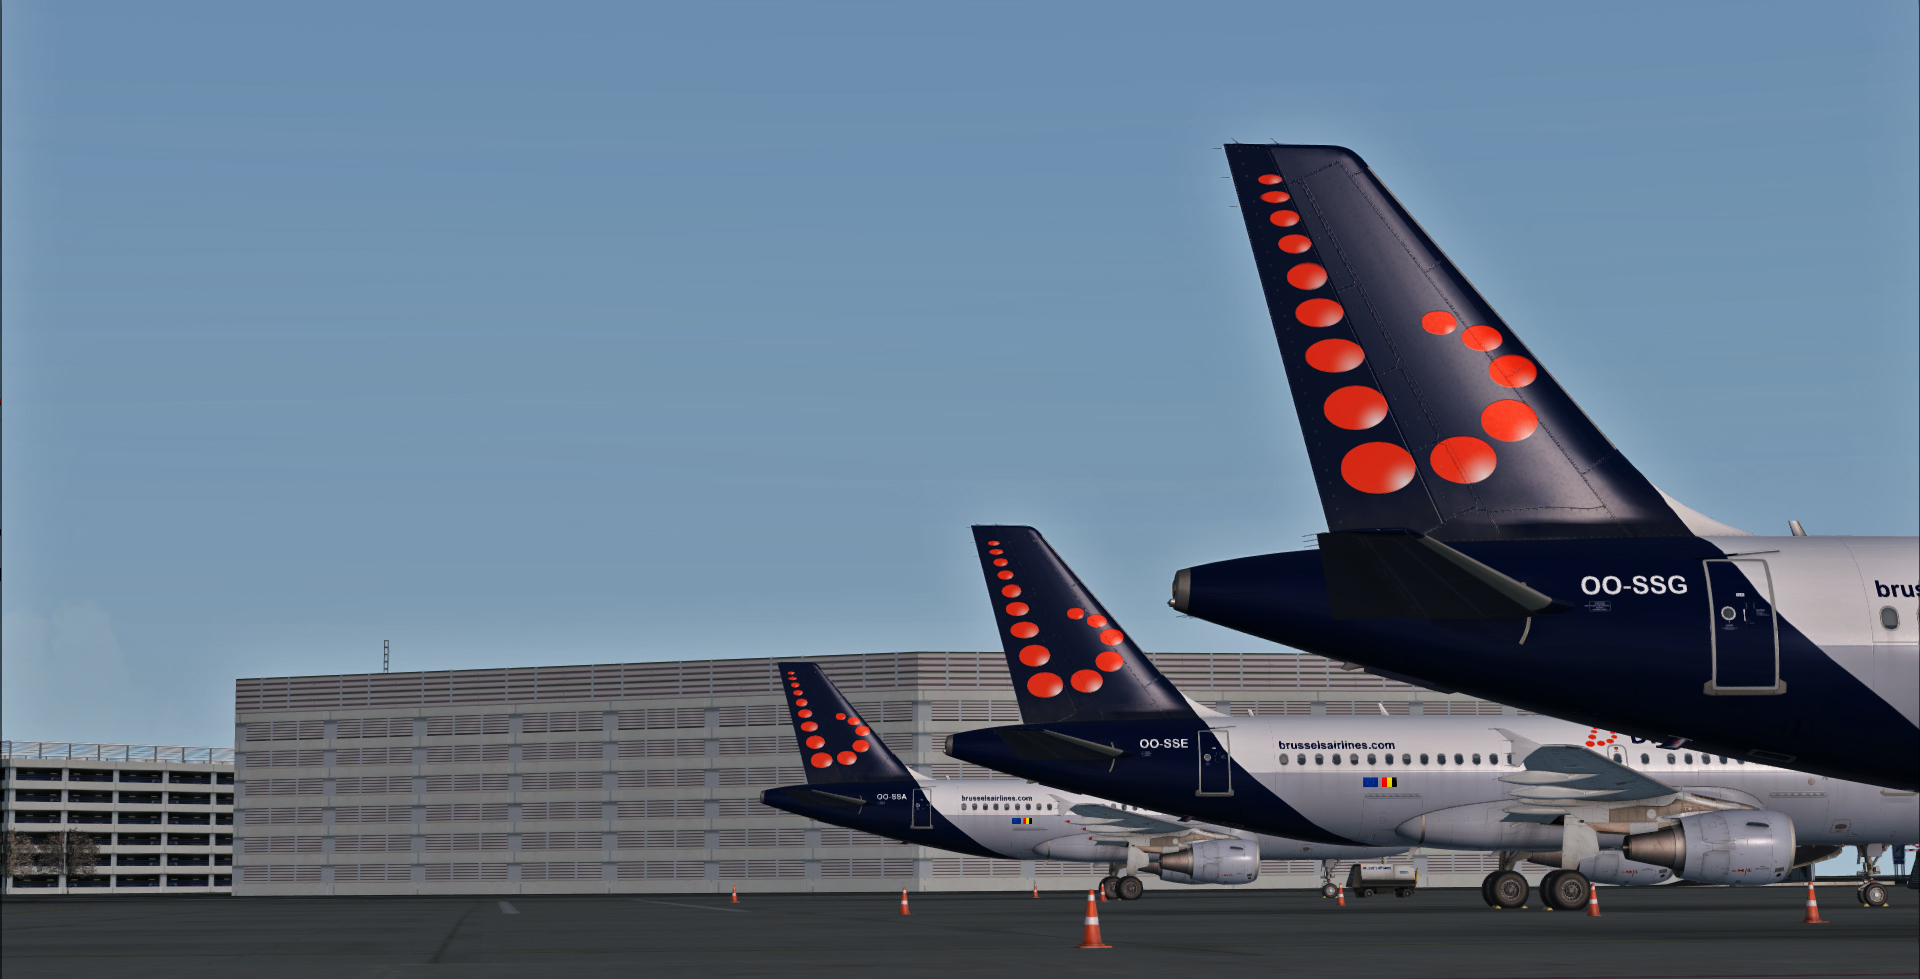 More information about "Complete Brussels Airlines A319 Fleet"